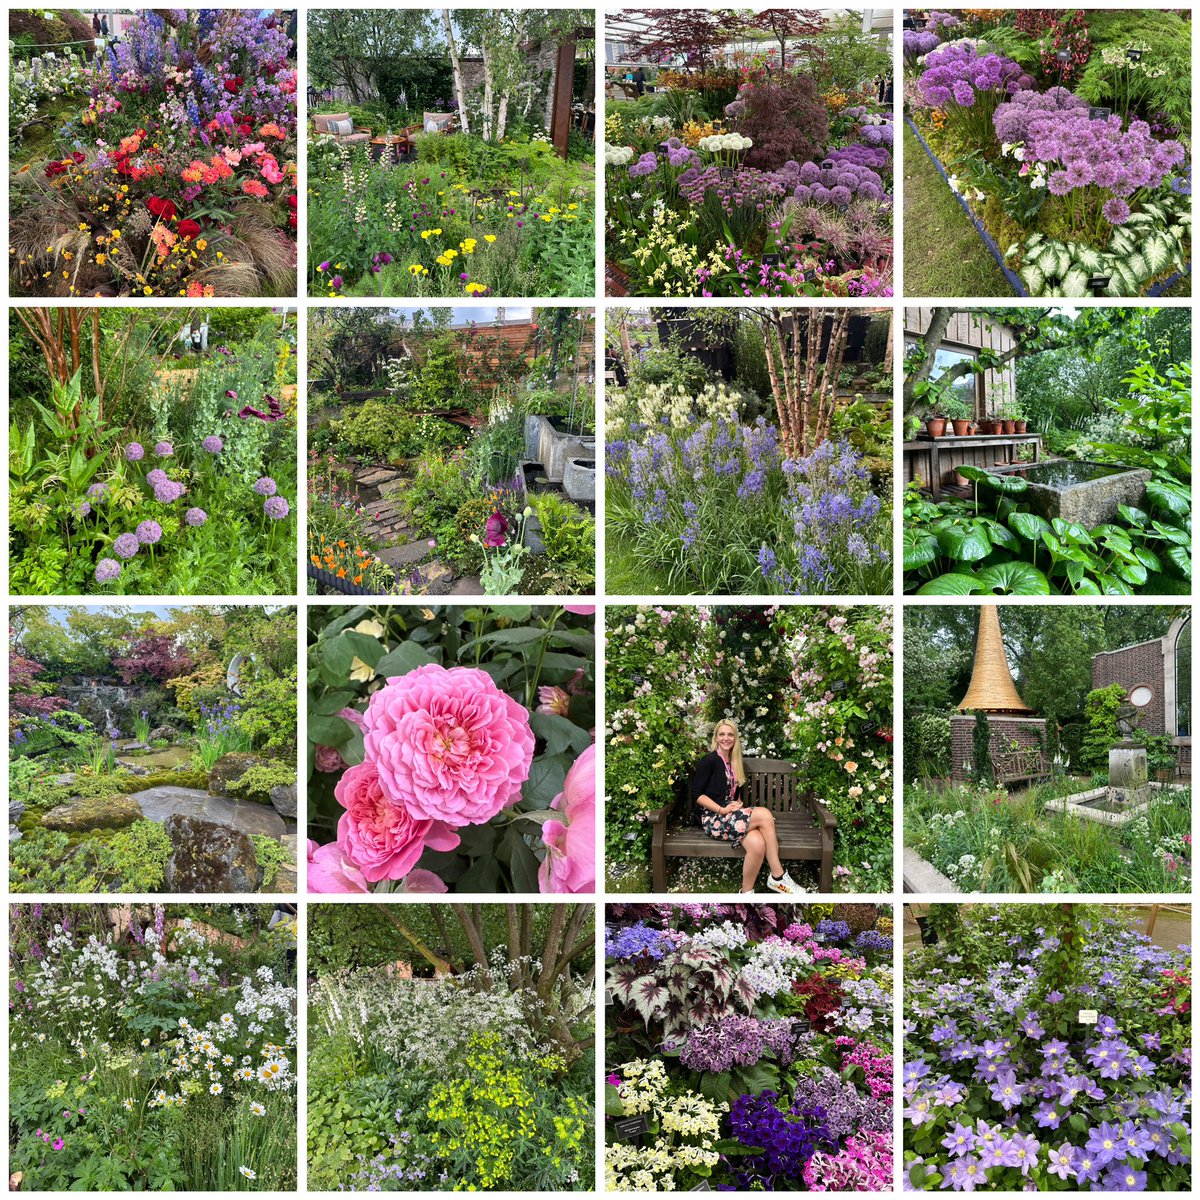 A few more favourites from a fantastic #RHSChelseaFlowerShow yesterday 🌸 #Flowers #Gardening